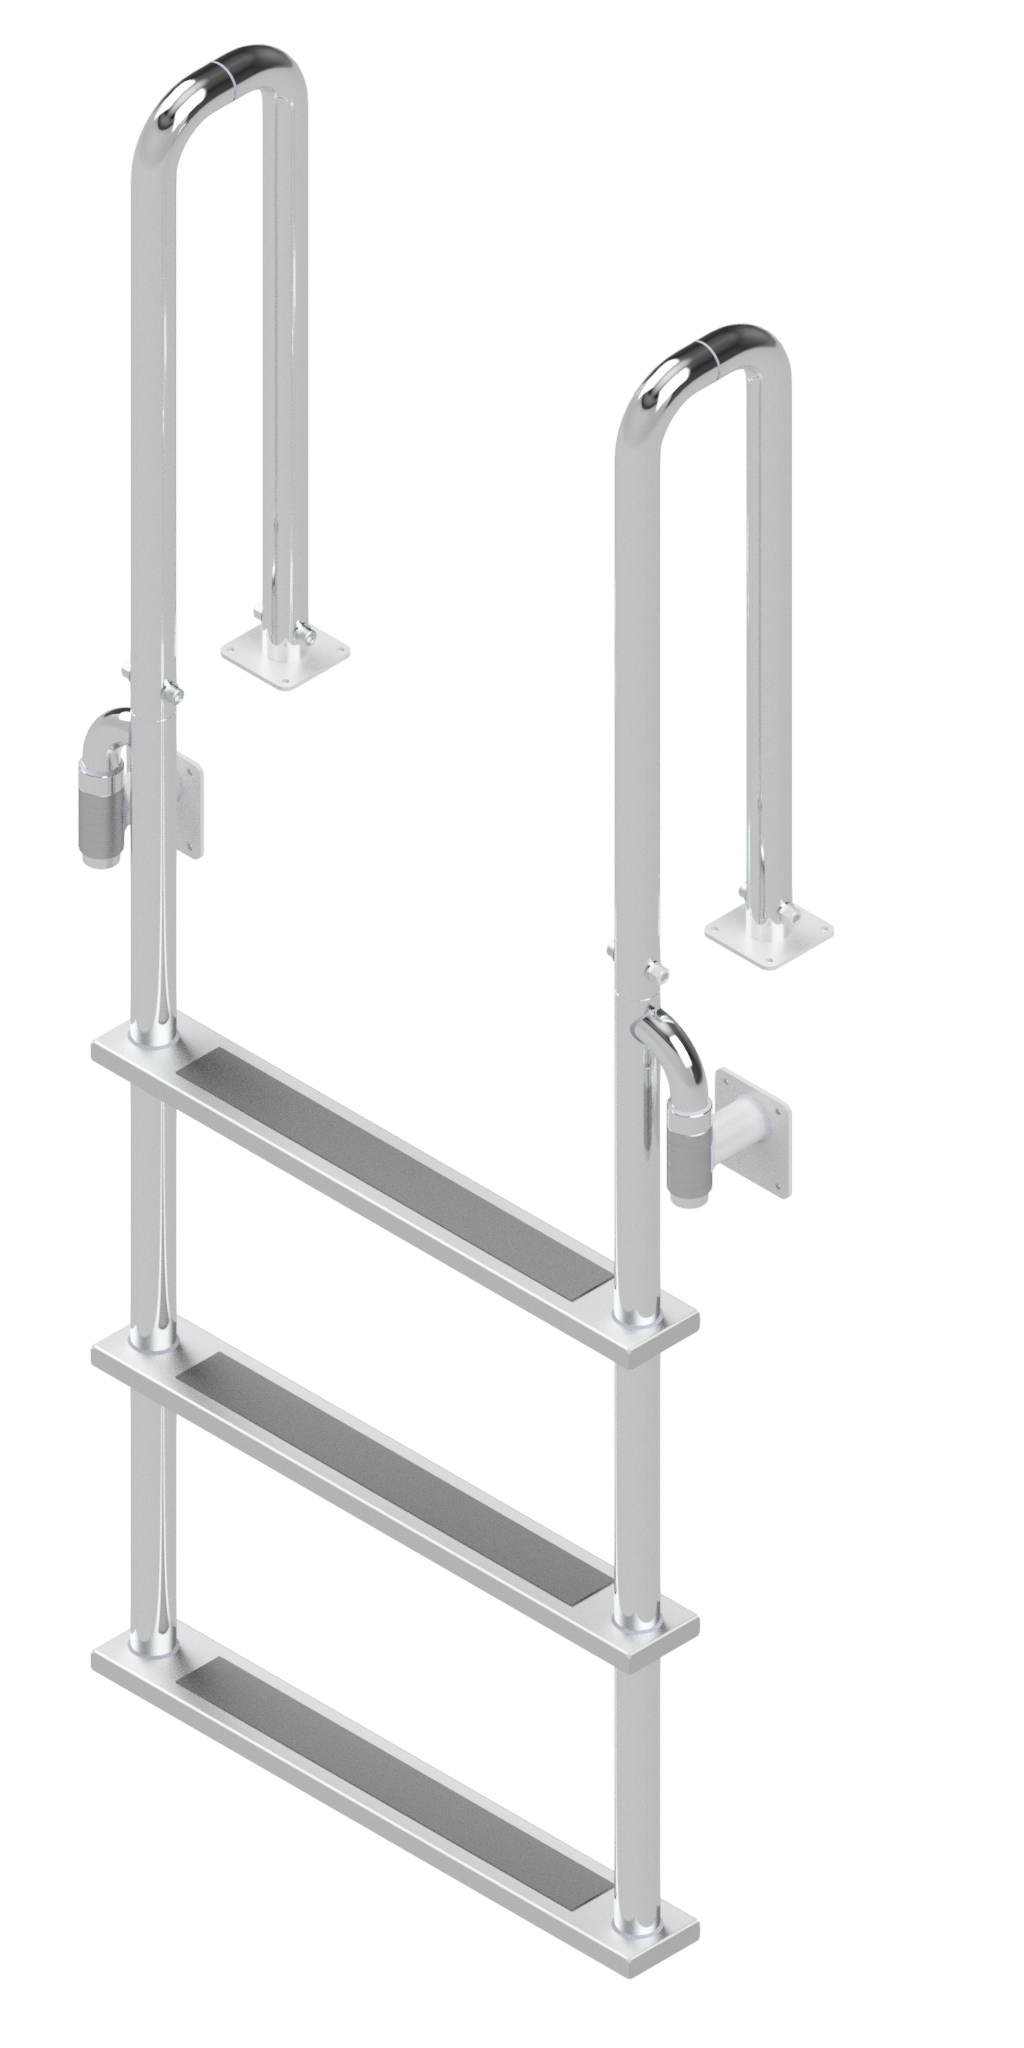 L-1201-LB Three-Step Stainless Steel Dock Ladder, Front Mount with Detachable Mounting Flanges - 6" Handles